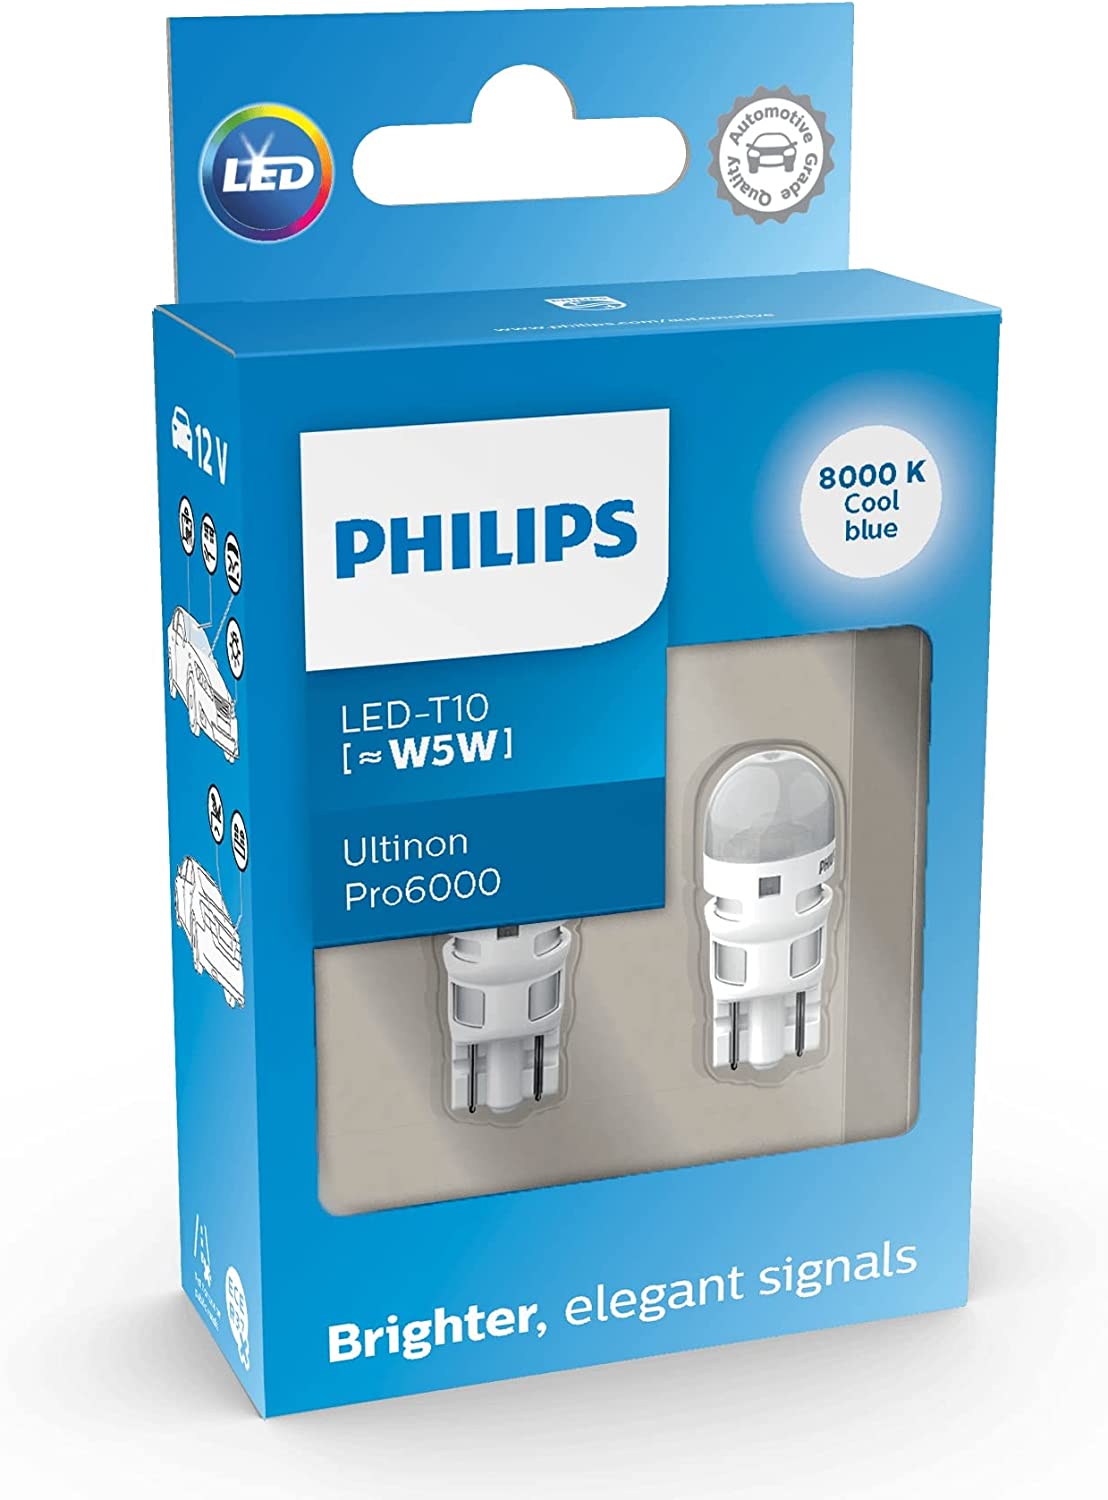 Transplanteren Monarchie Mevrouw Philips Ultinon Pro6000 LED 501 T10 car sidelight bulbs (W5W), 8.000K cool  blue, white | HIDS Direct for HID Xenon kits, Xenon bulbs, MTEC bulbs, LED's,  Car Parts and Air Suspension